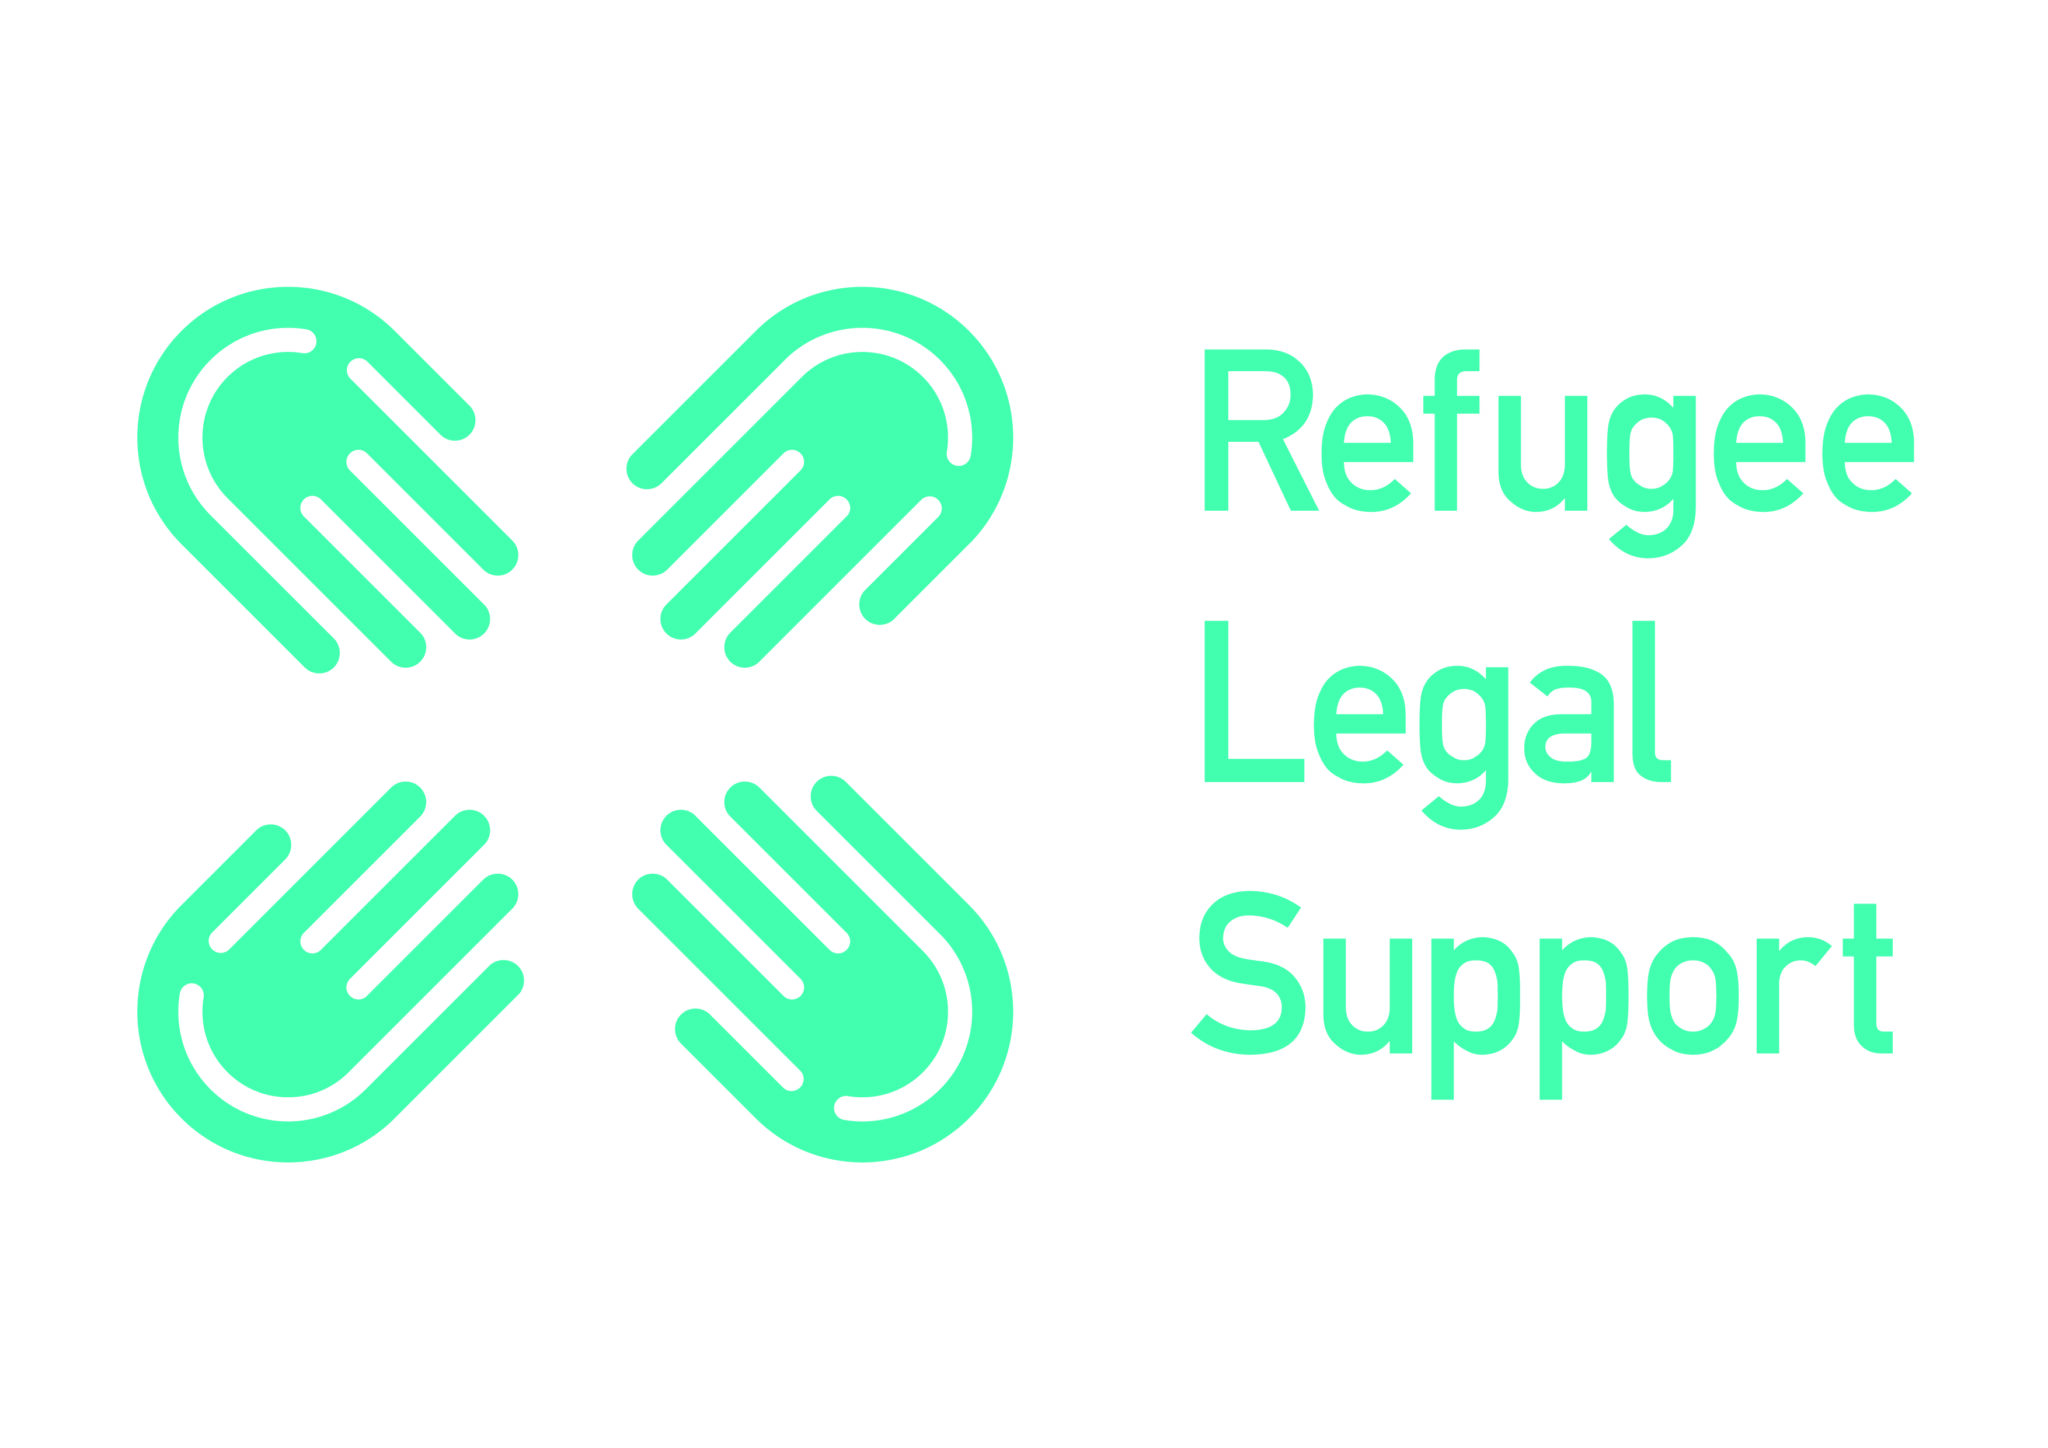 Job Ad: Refugee Legal Support is recruiting for a Solicitor (Legal aid supervisor)